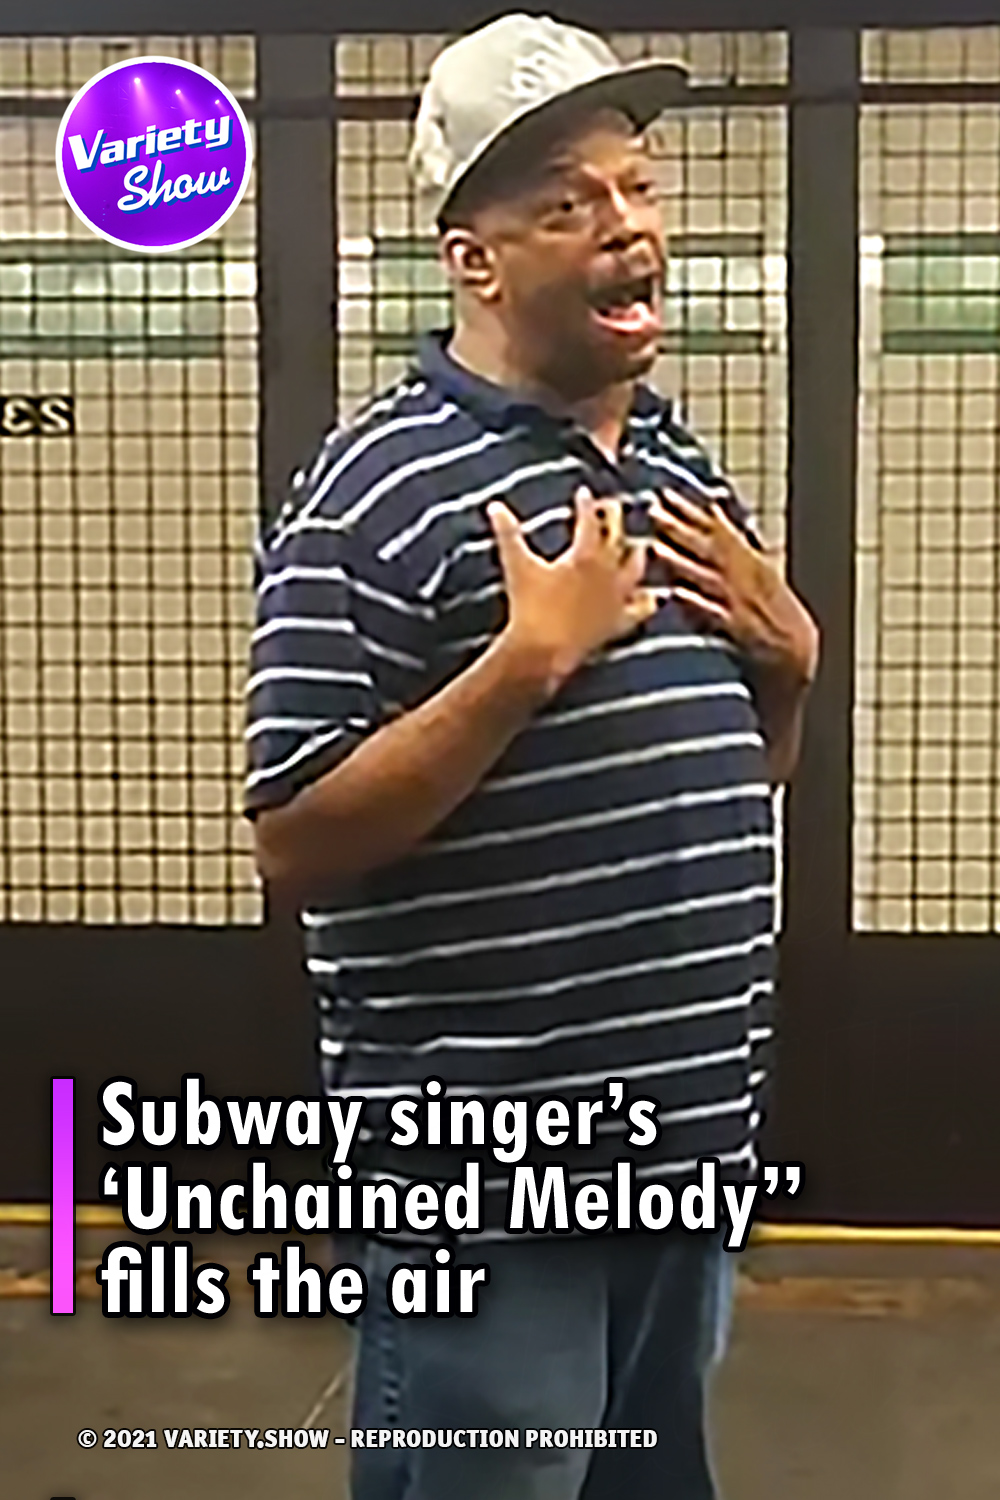 Subway singer’s ‘Unchained Melody” fills the air